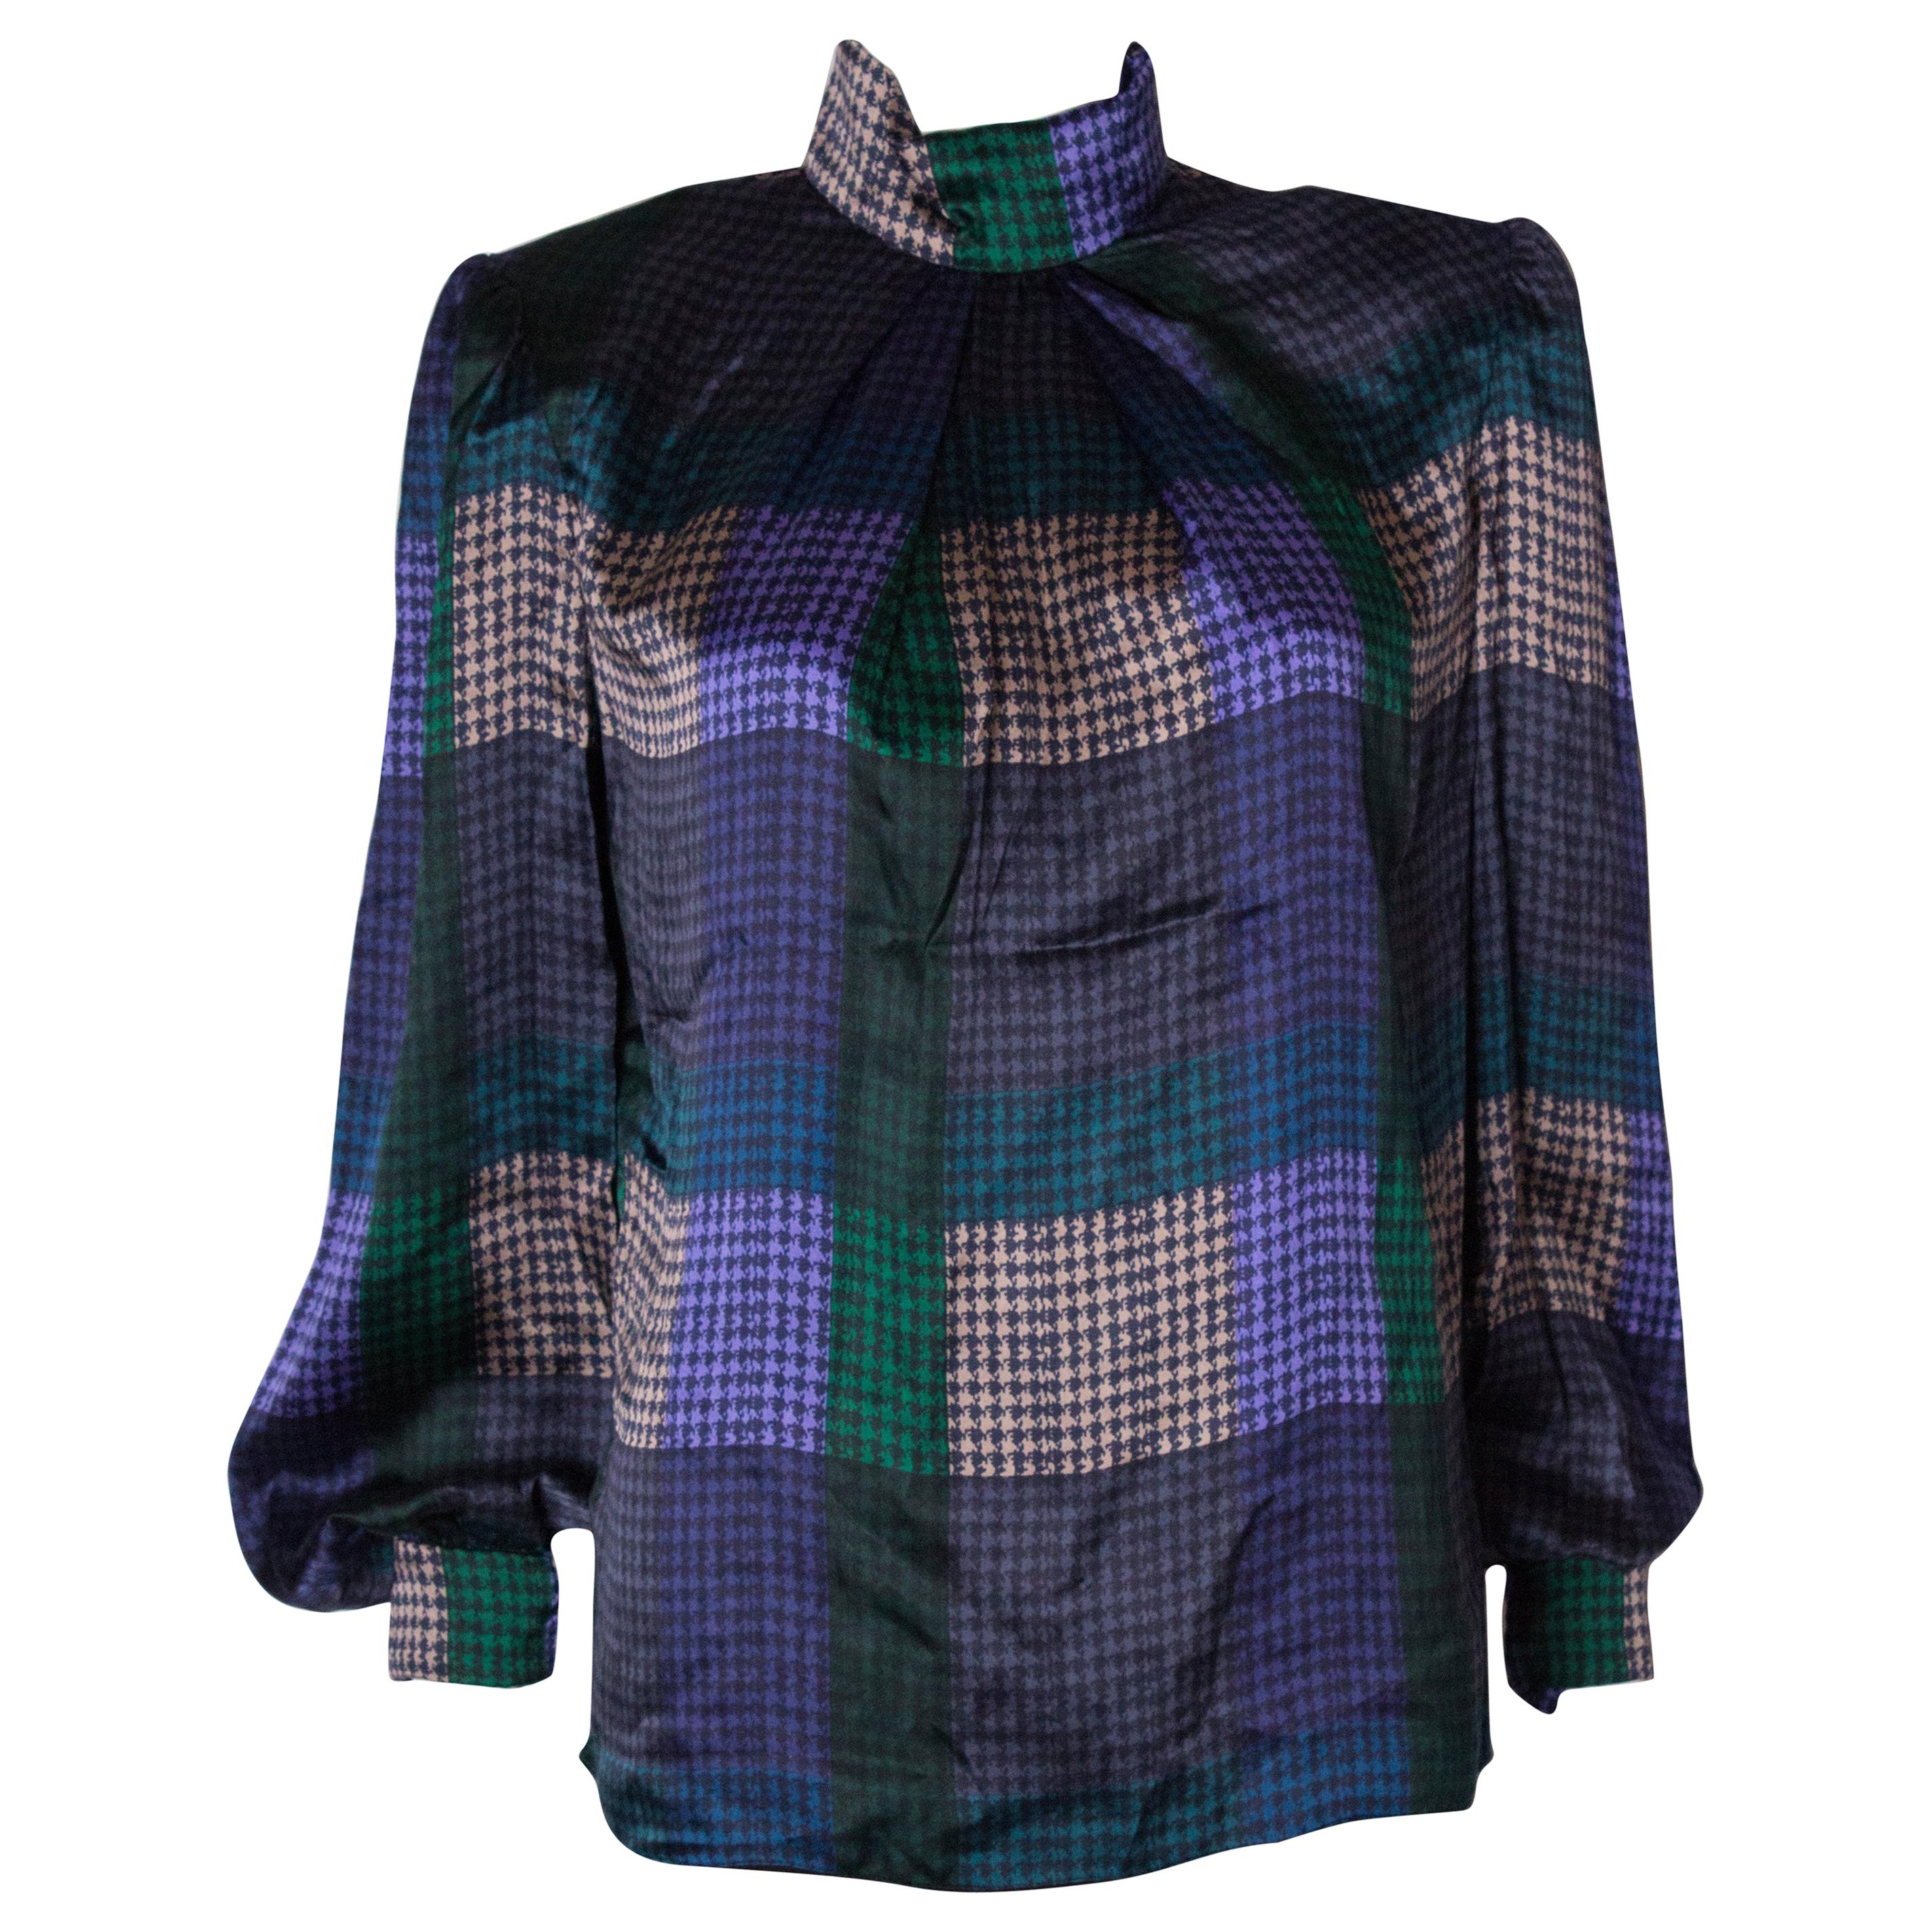  Vintage  Multicolour Silk Blouse by Donald Campbell